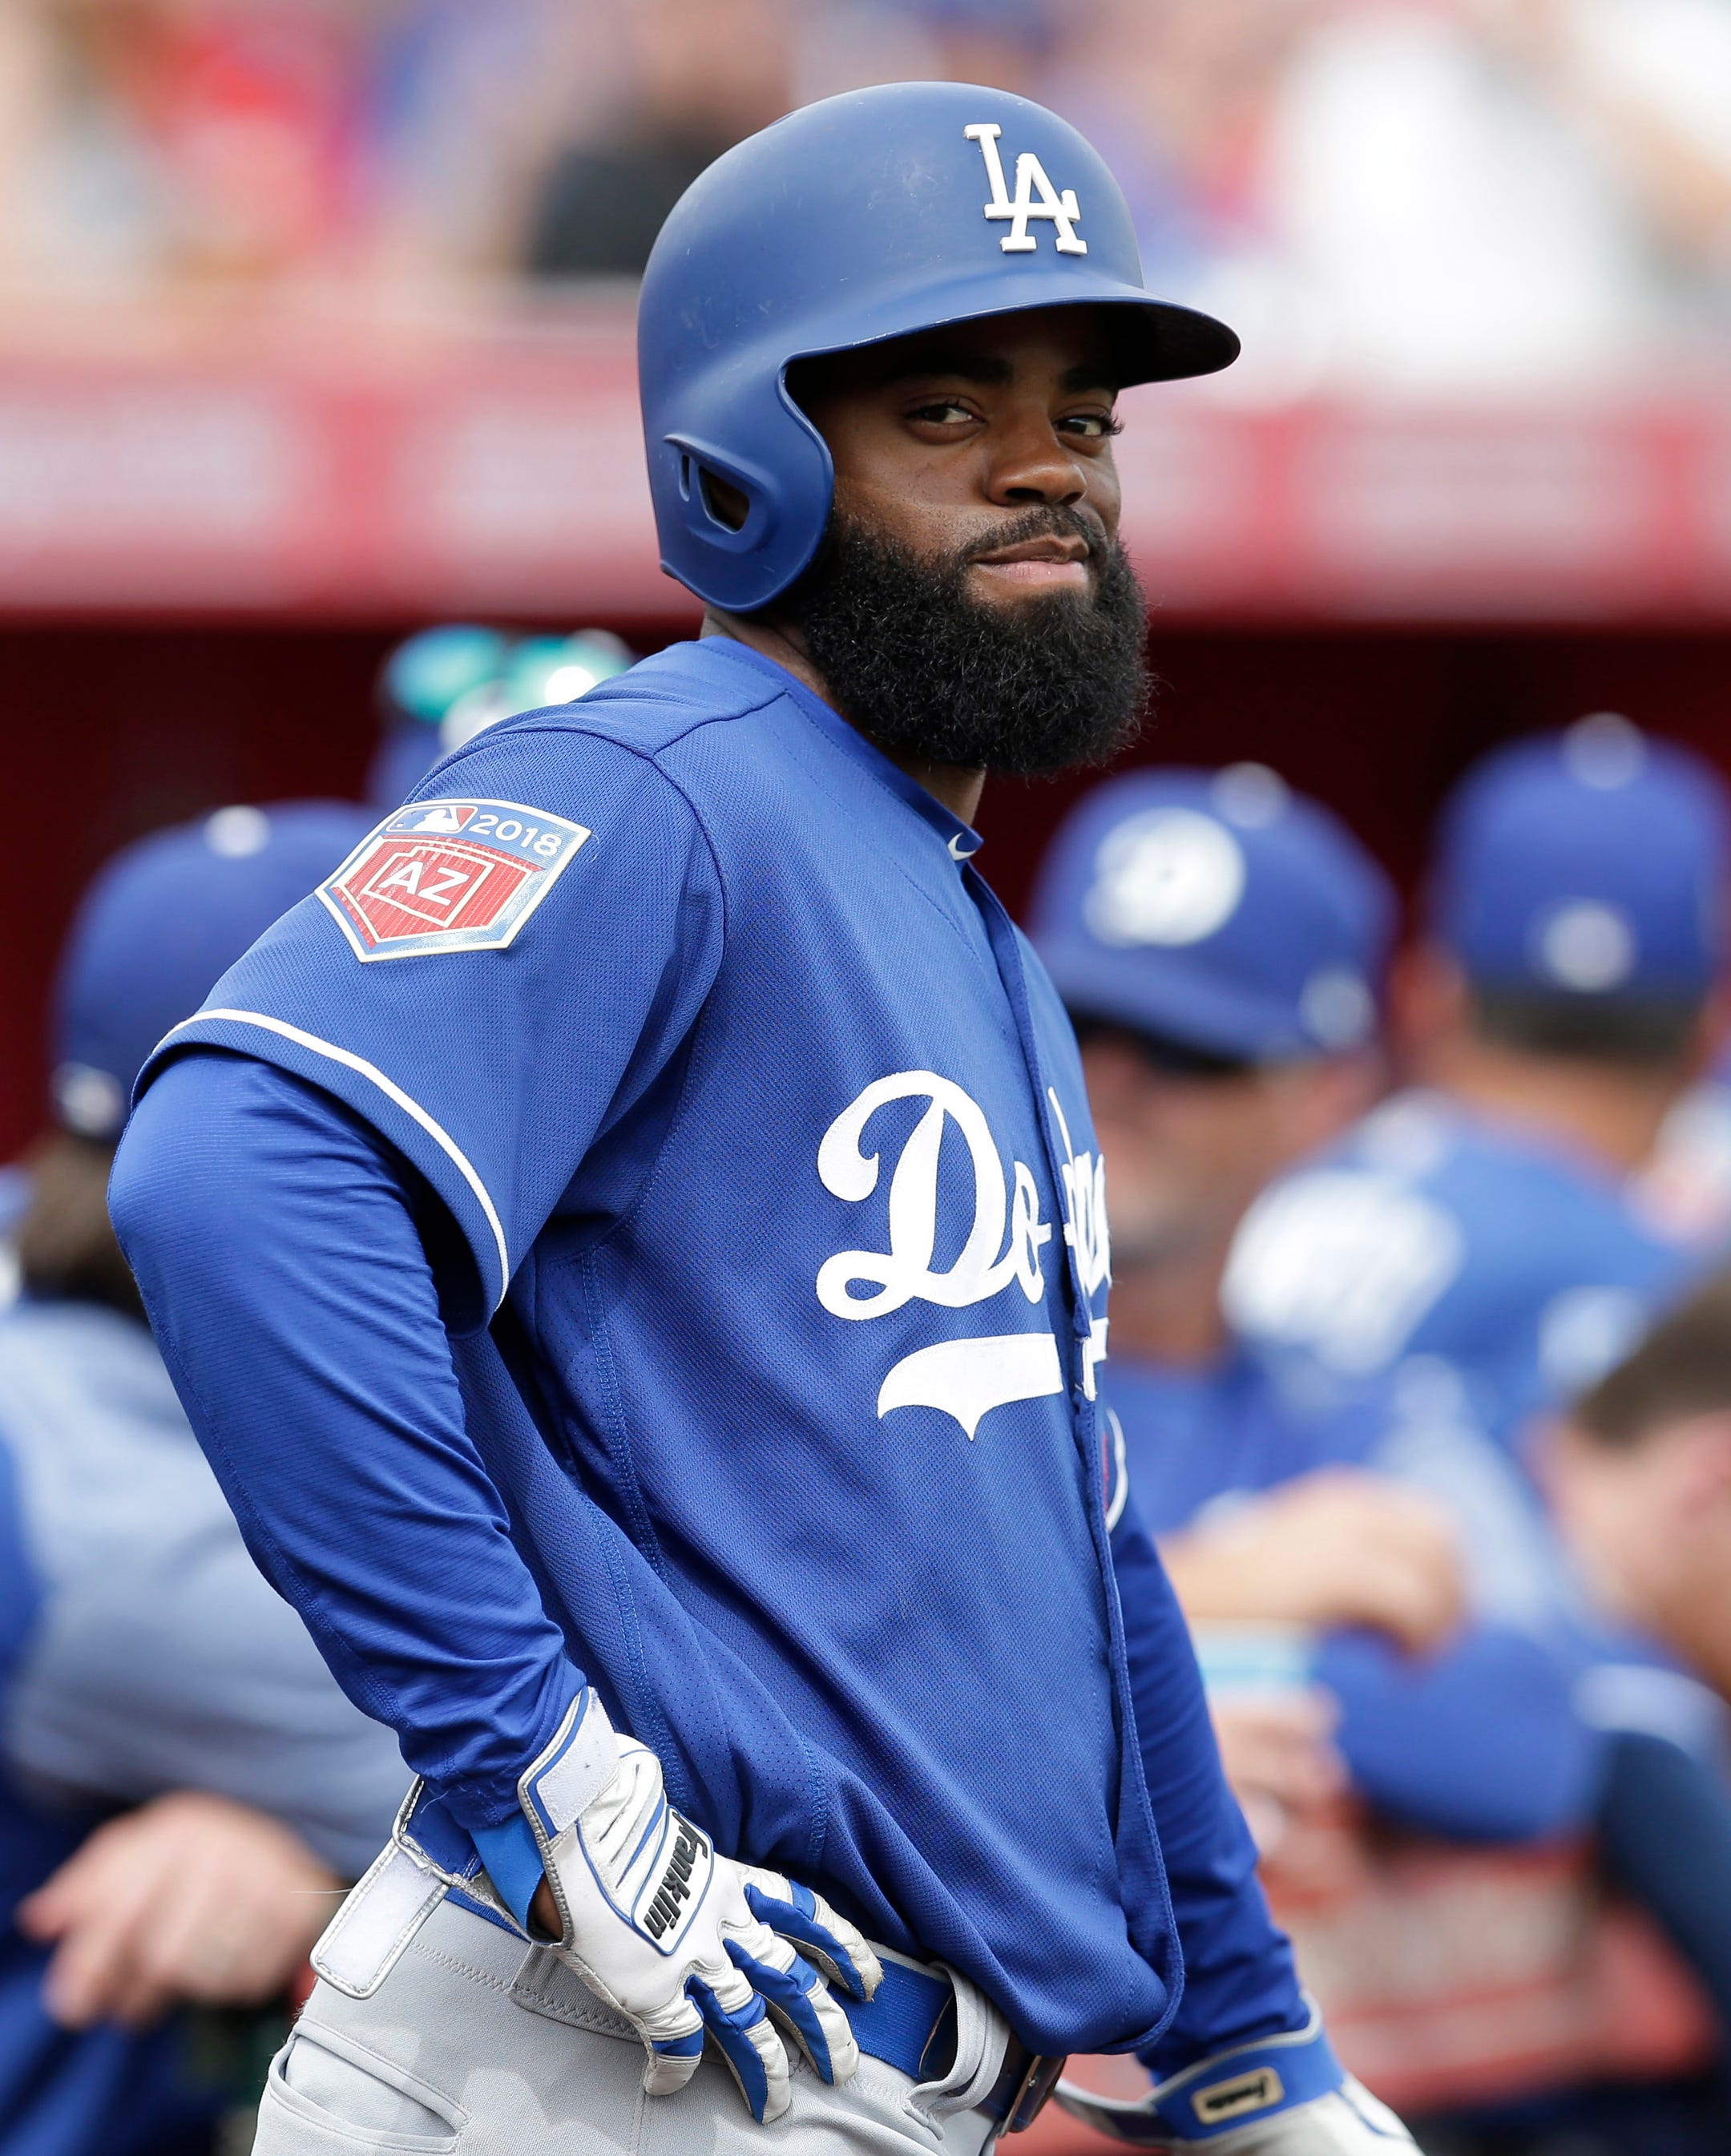 Father of Dodgers' Andrew Toles, who is mentally ill, prays for son